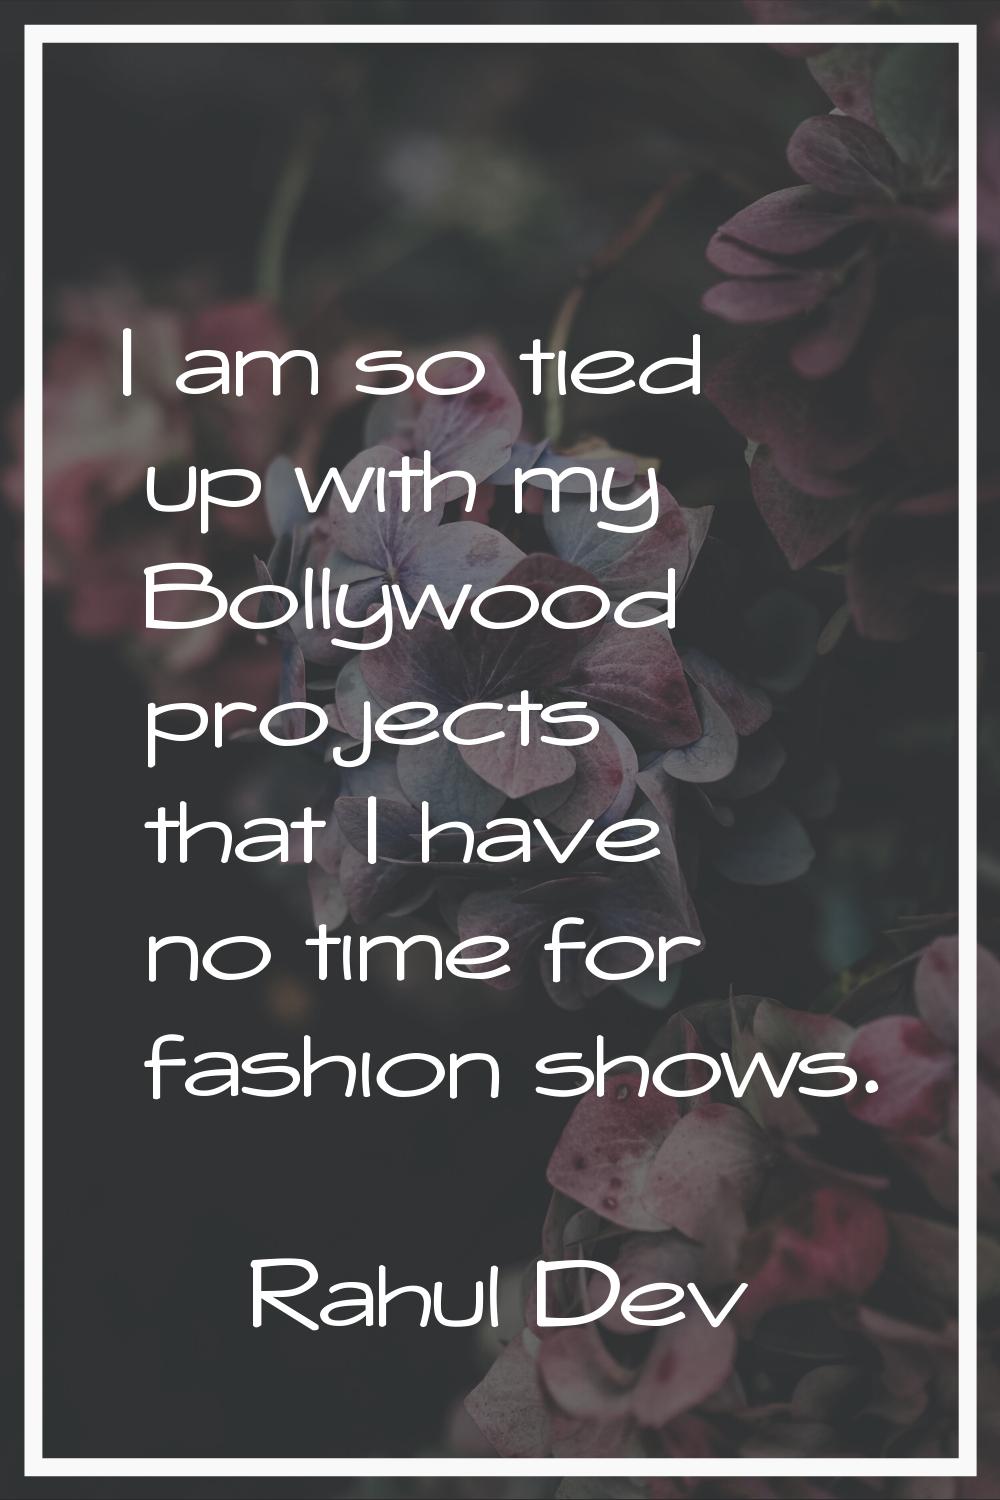 I am so tied up with my Bollywood projects that I have no time for fashion shows.